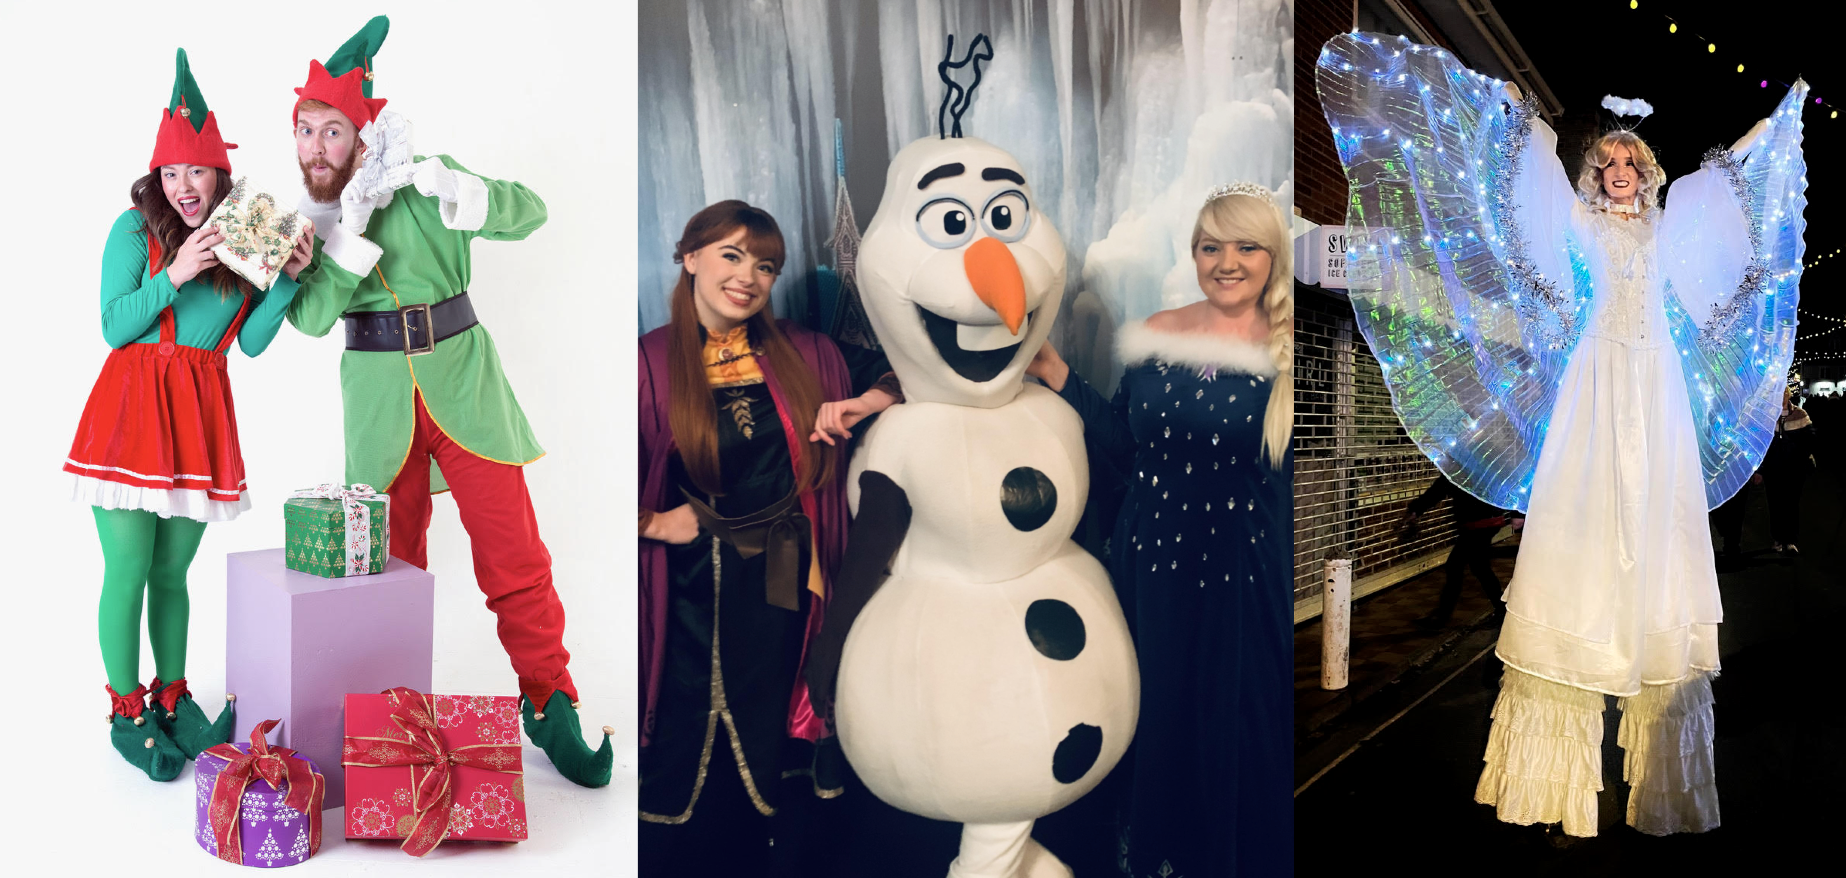 Elves, fairies and storybook characters for festive extravaganza